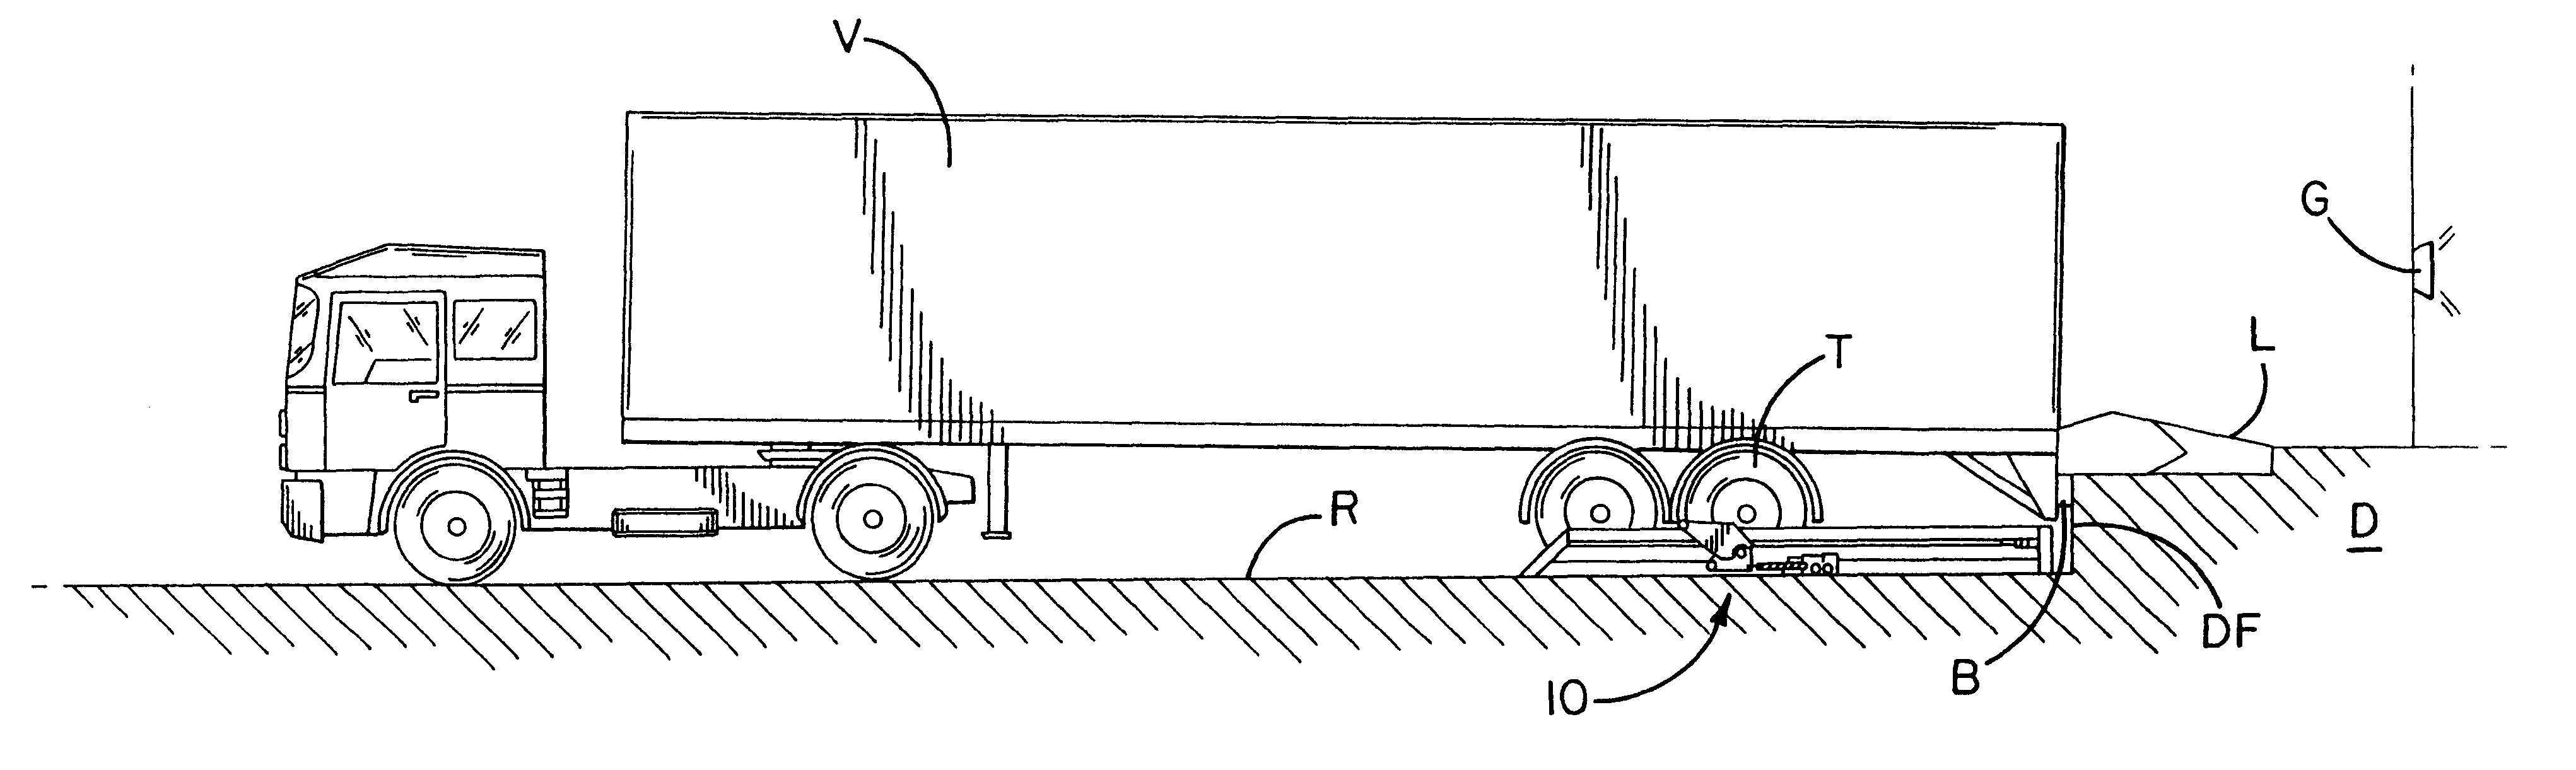 Wheel-activated vehicle restraint system